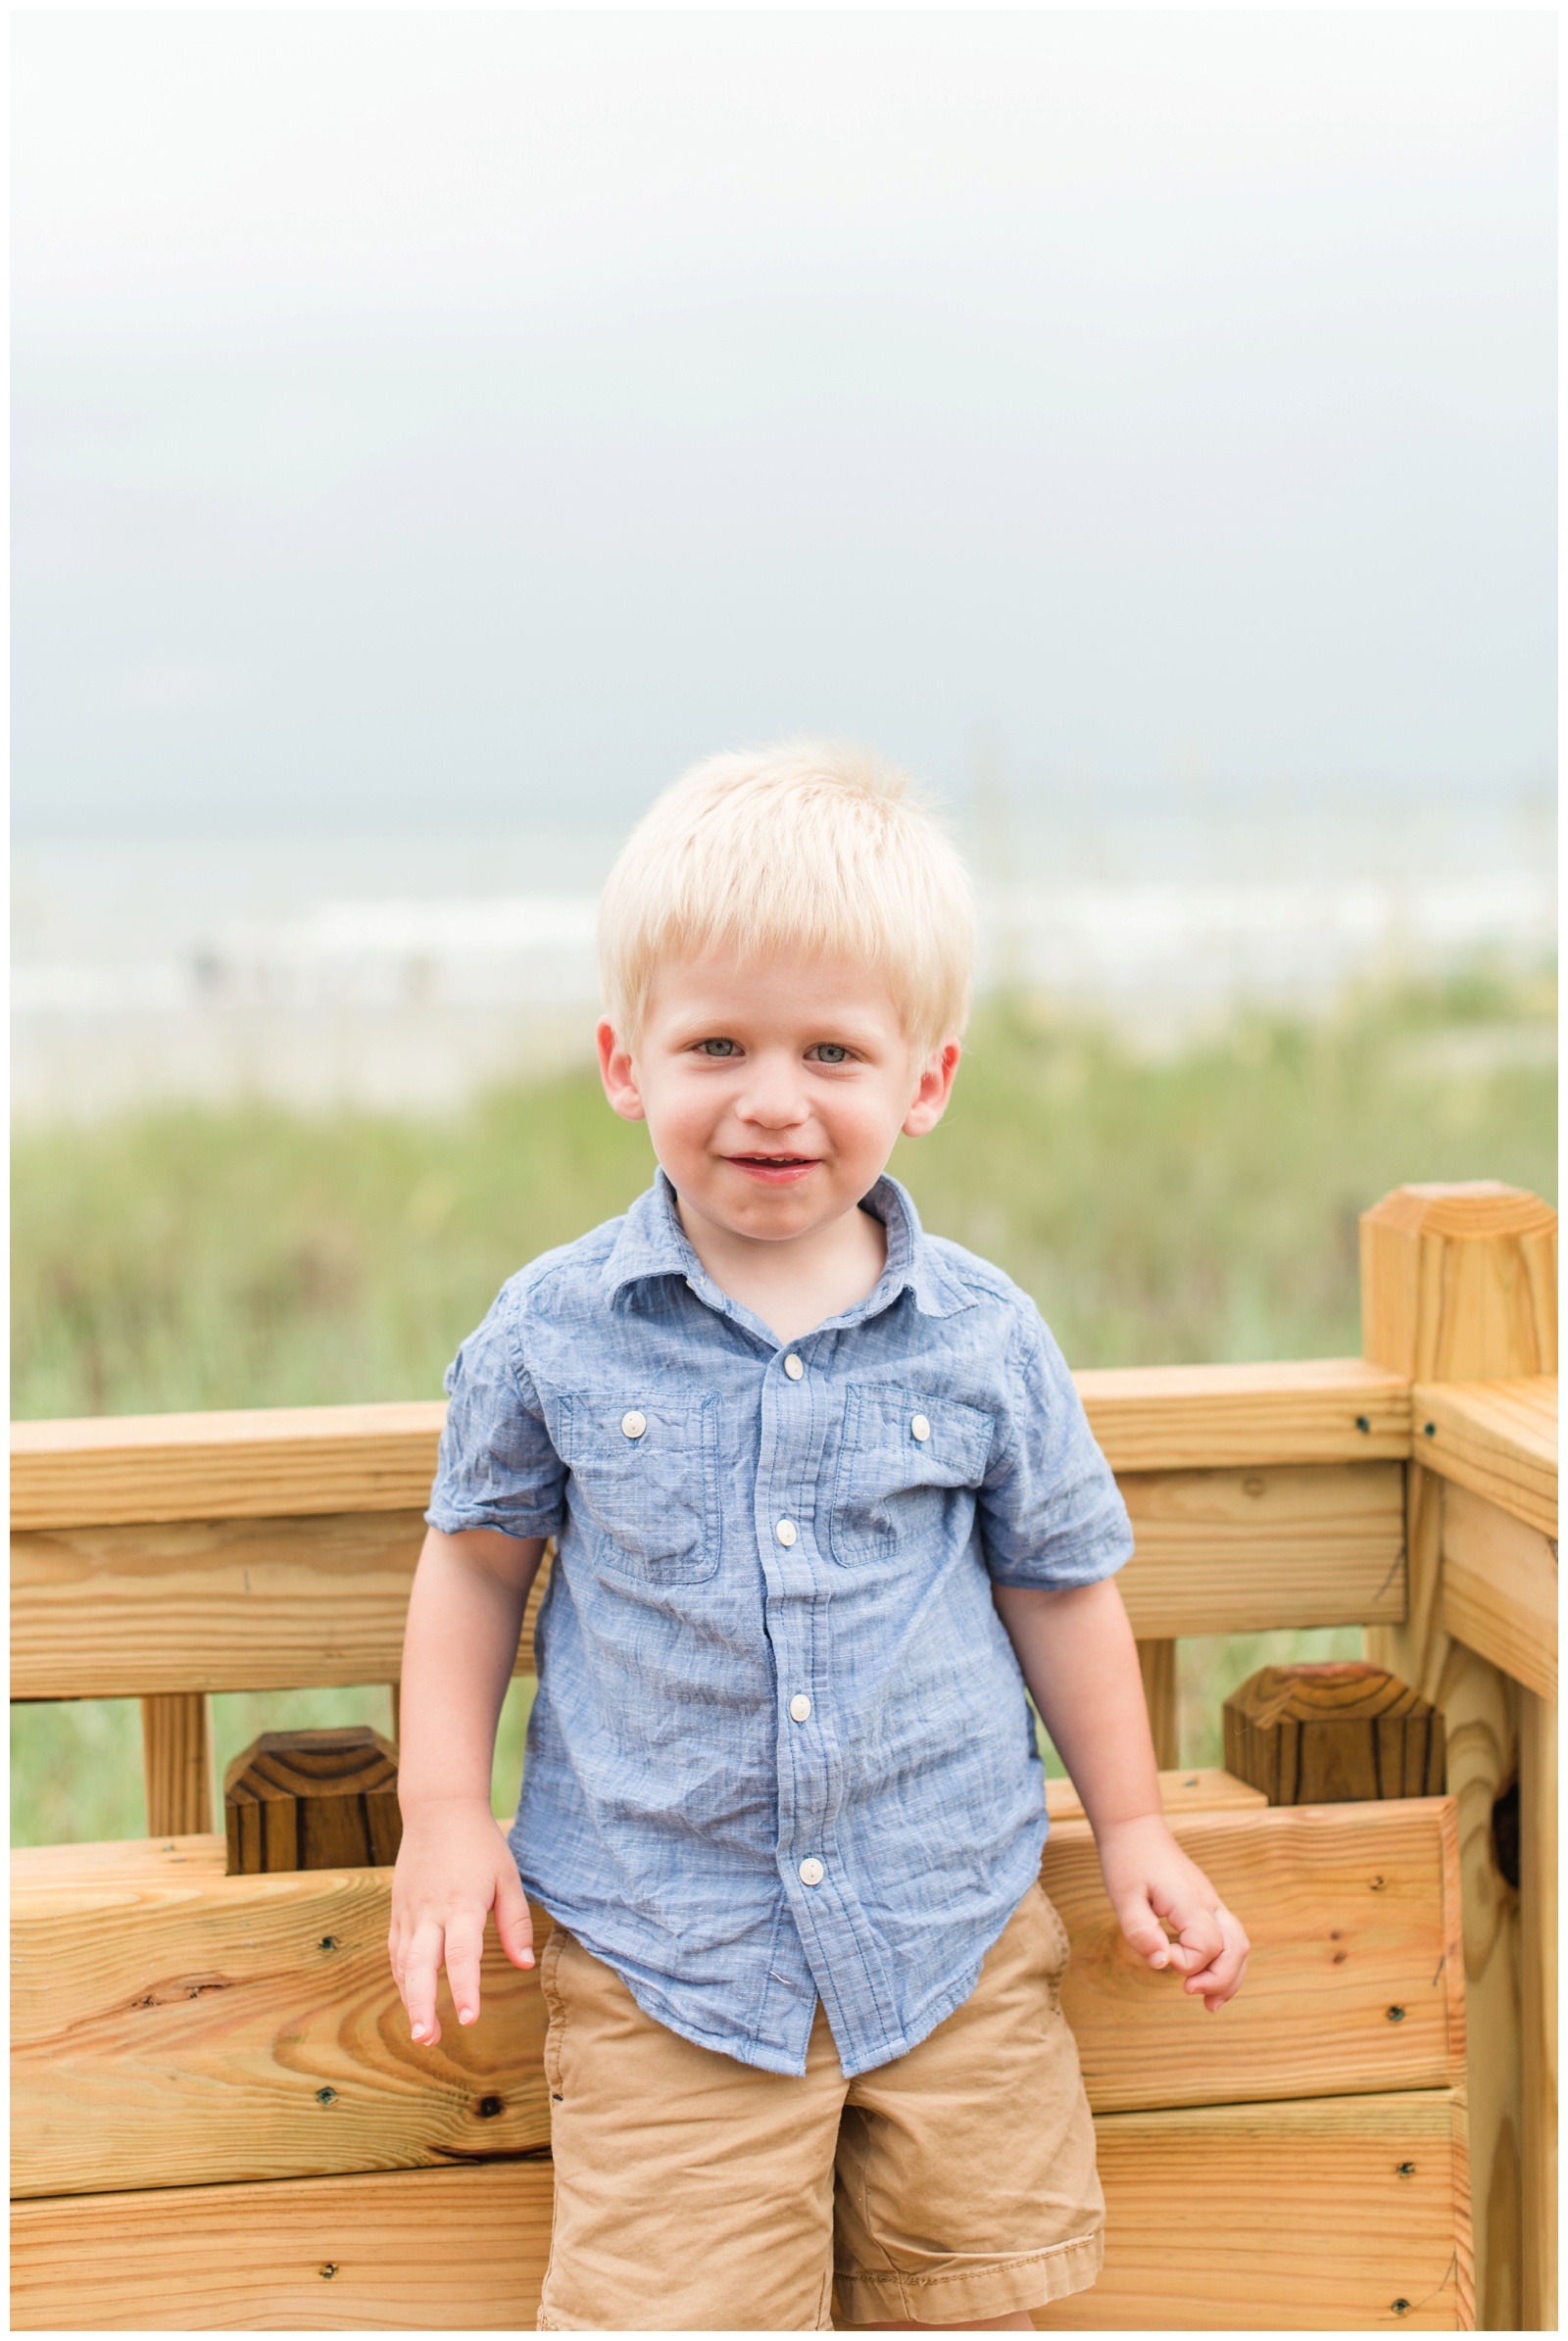 Ocean front and beach family portrait photography. Playing in the ocean North Myrtle Beach South Carolina Oceanfront Fun Family Vacation